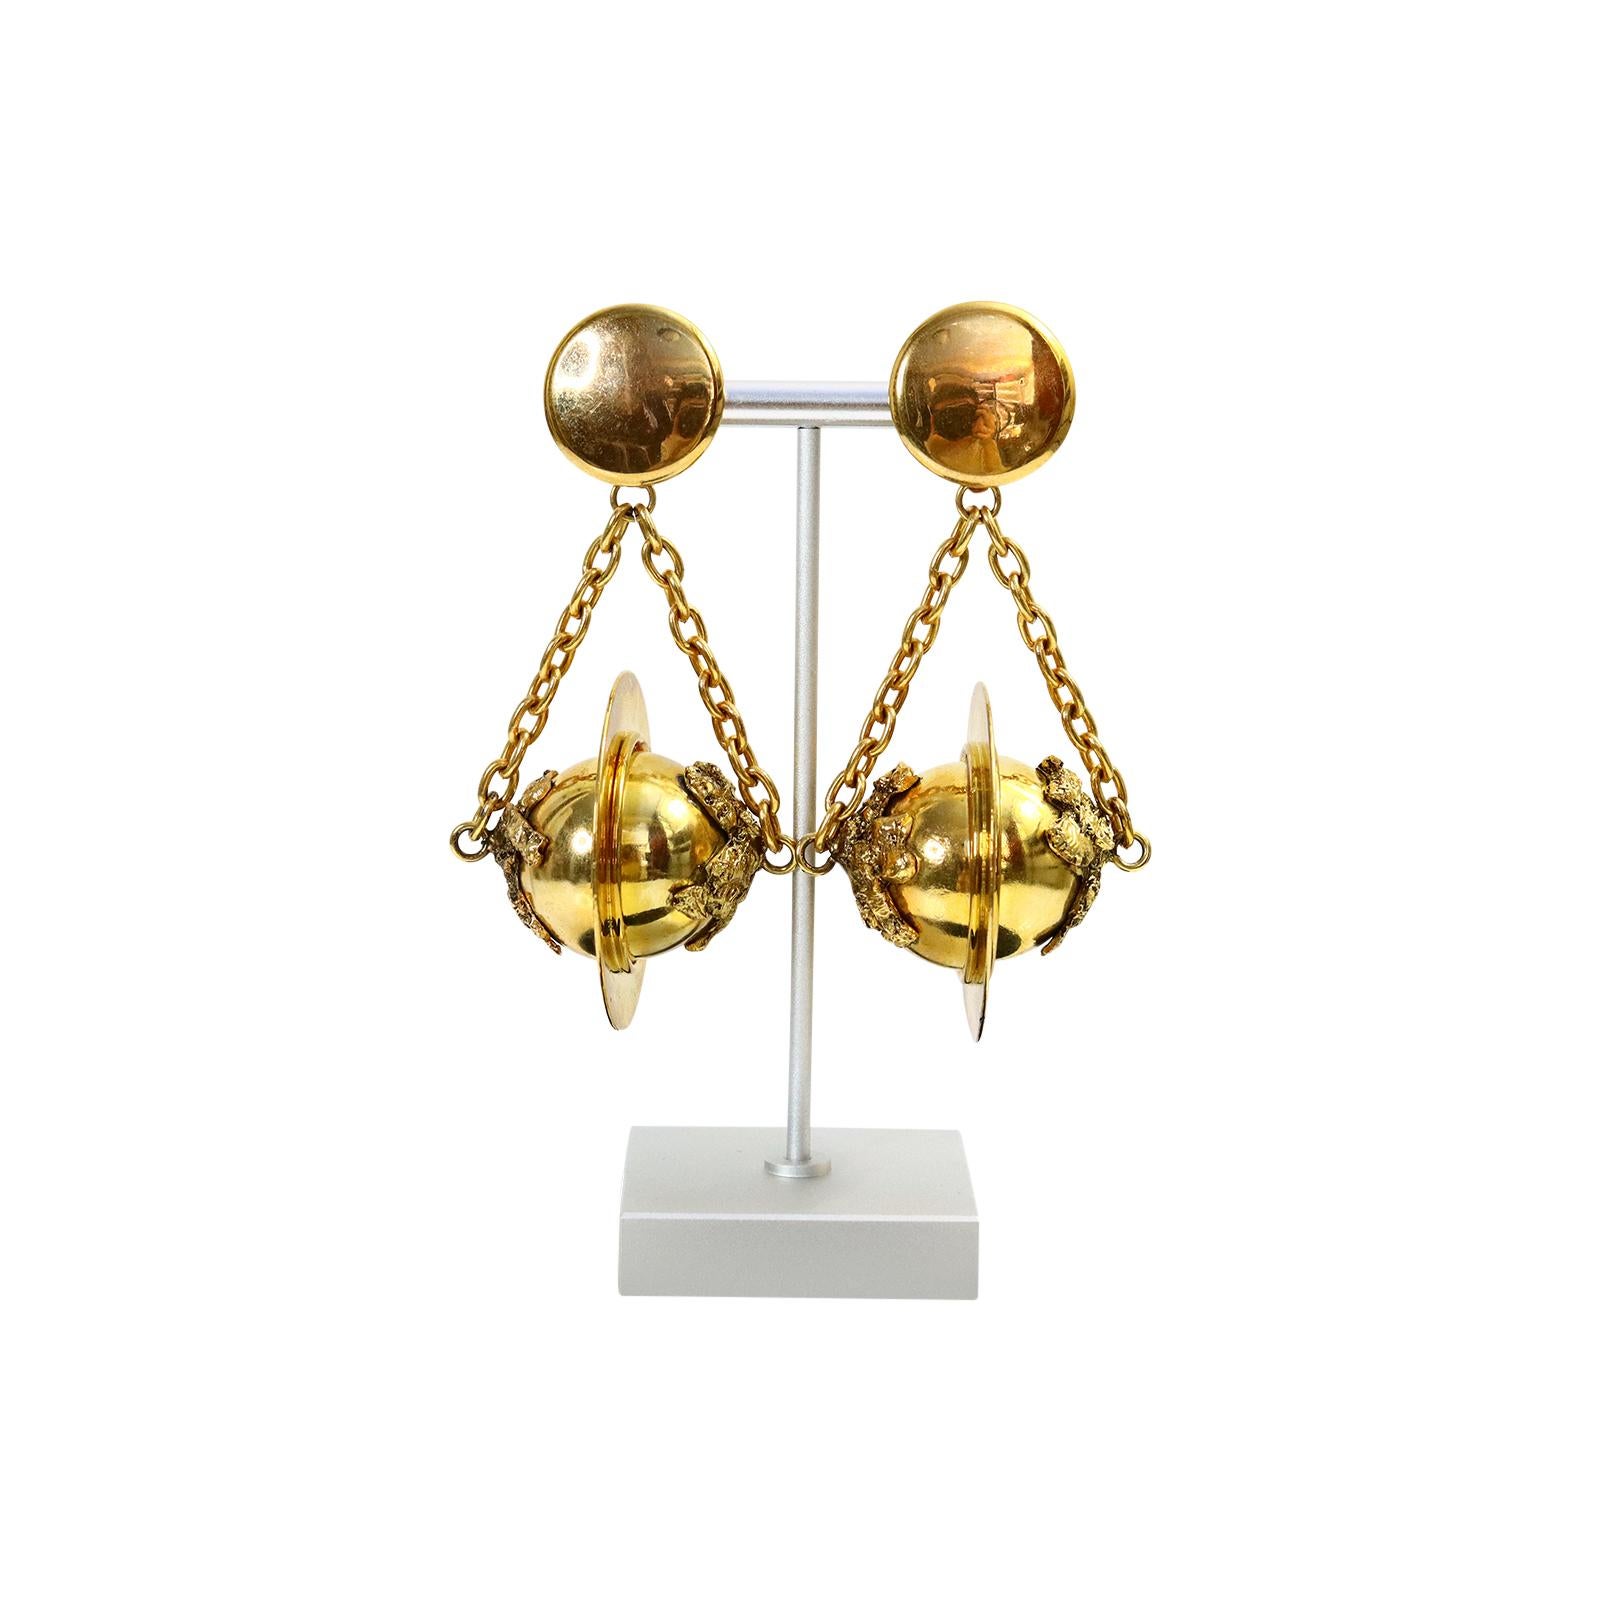 Vintage Premiere Etage Paris Dangling Gold Tone Globe Earrings, Circa 1980s In Good Condition For Sale In New York, NY